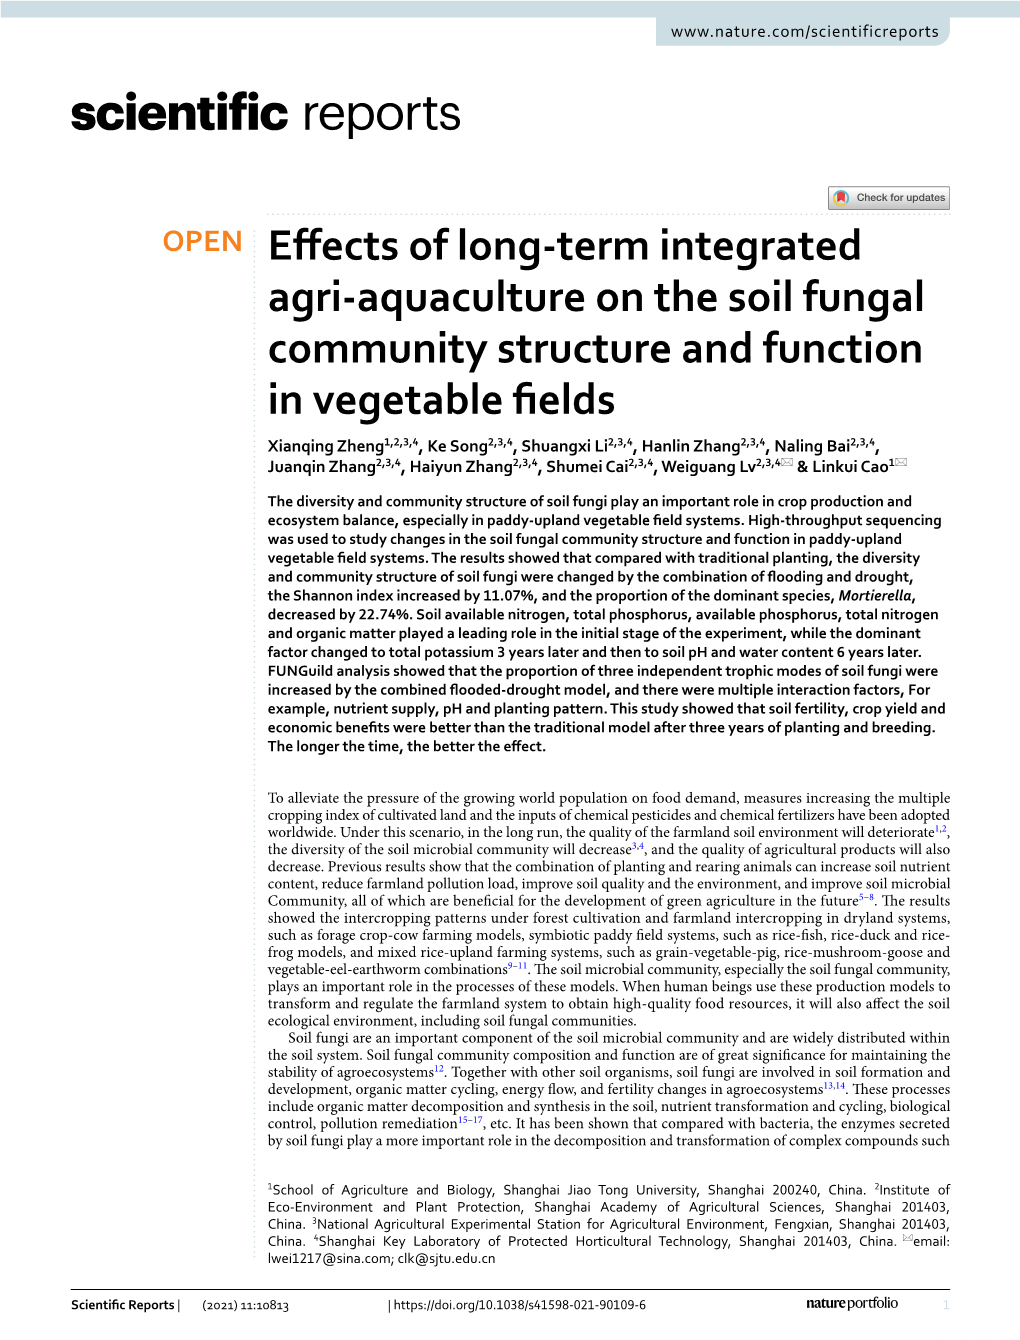 Effects of Long-Term Integrated Agri-Aquaculture on the Soil Fungal